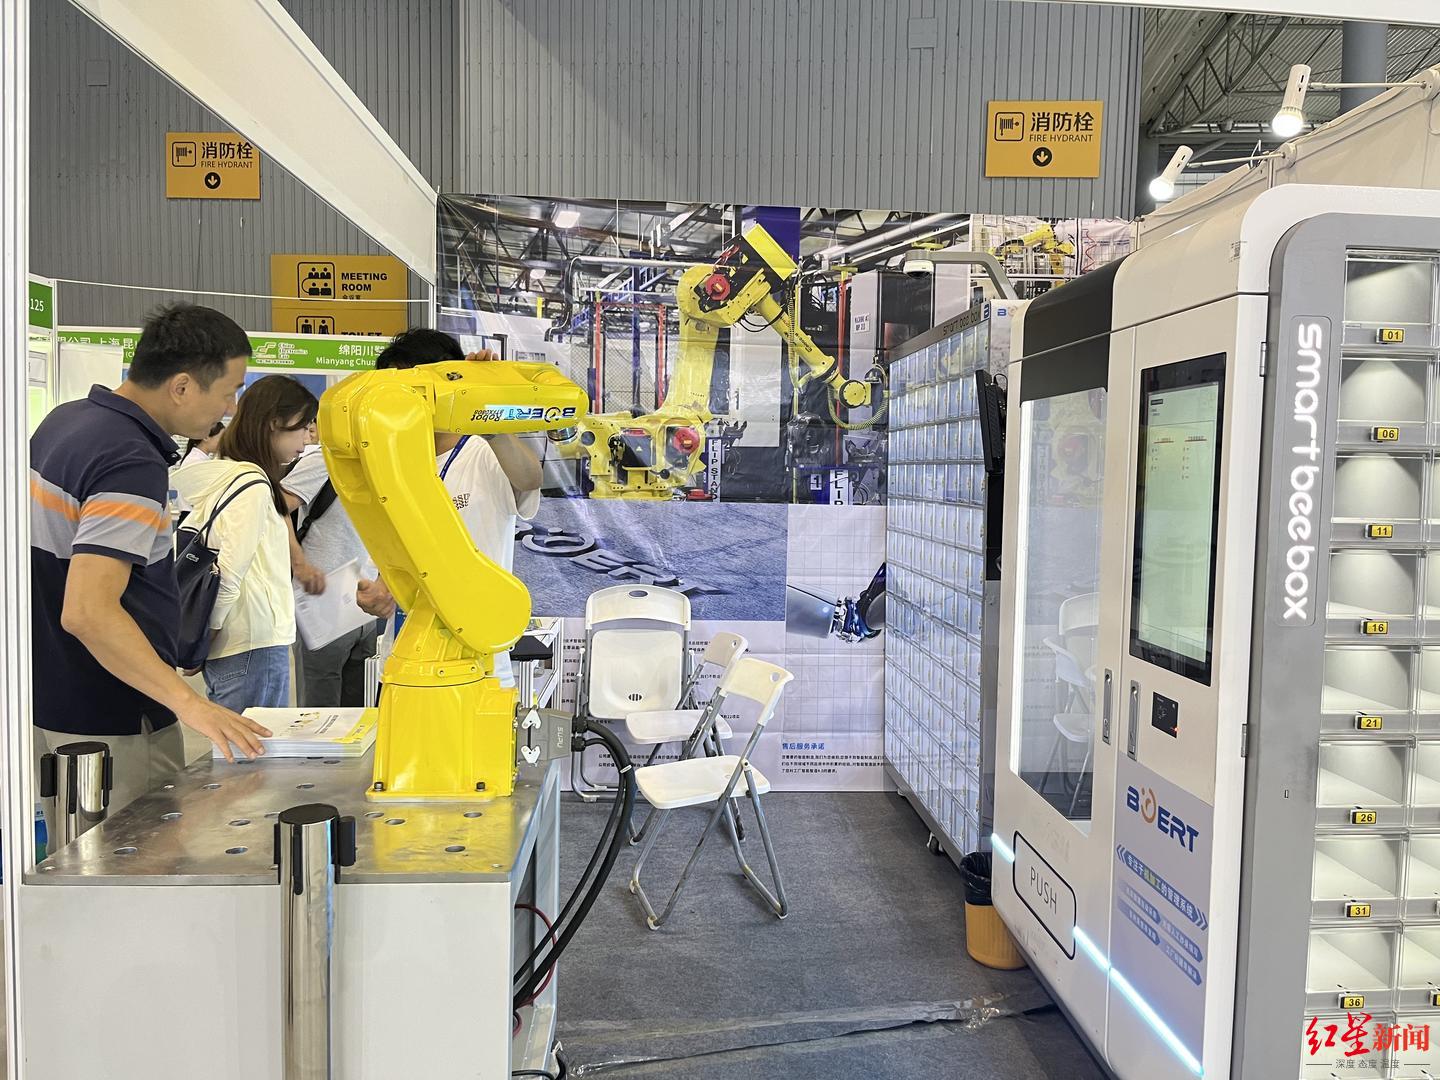 What will you watch at the 11th Western China Electric Power Expo? Robot arm, 5G+AI, new display screen unveiled